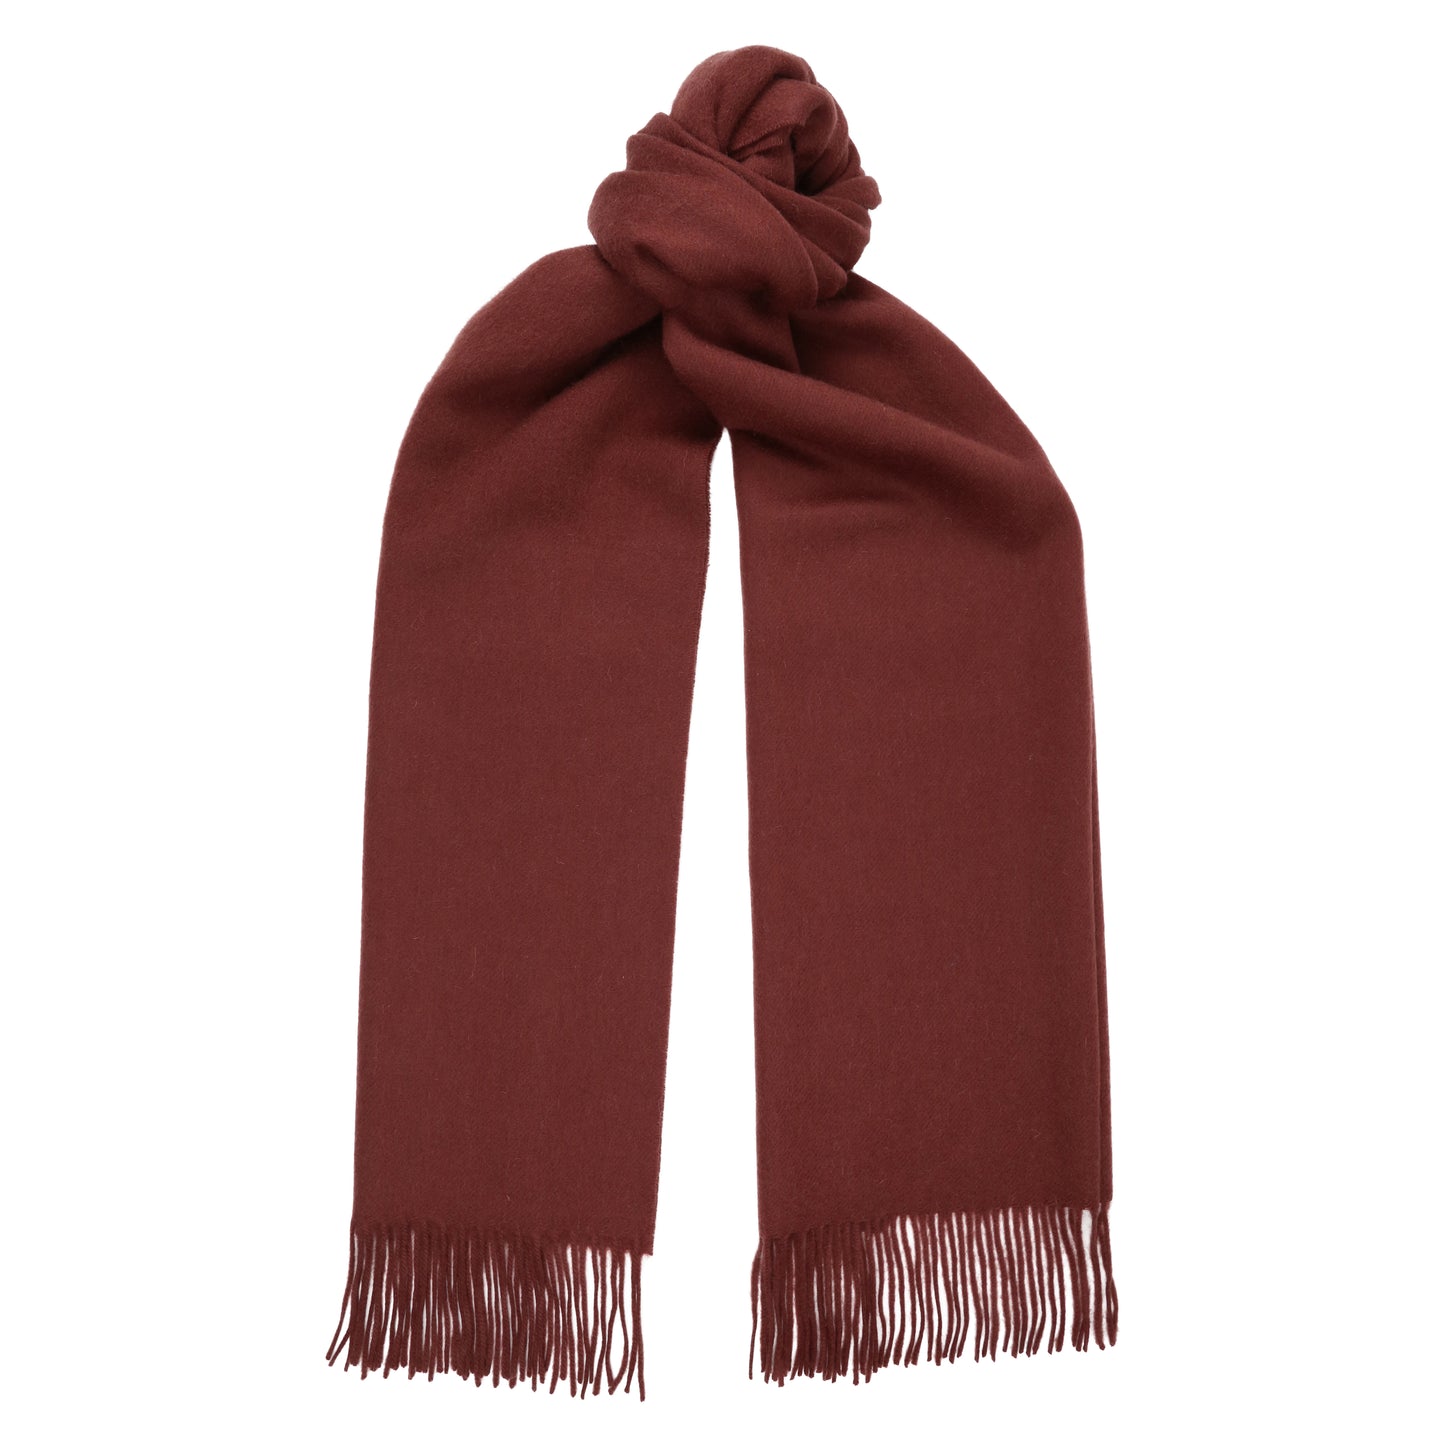 Rich Merlot Burgundy 100% Lambswool Long Scarf with Fringes